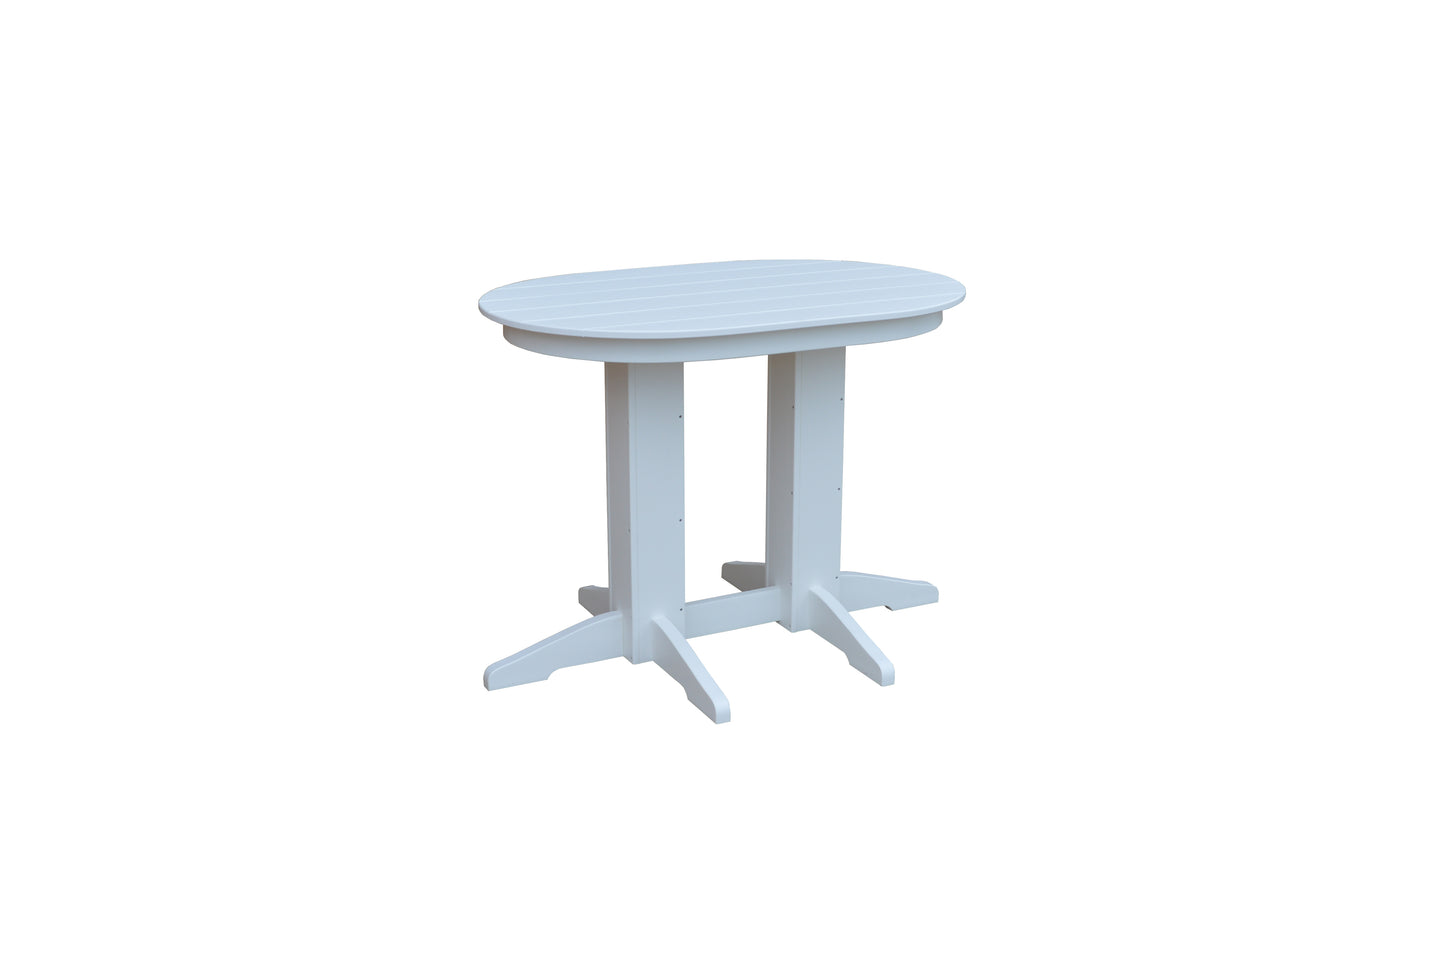 A&L Furniture Co. Recycled Plastic 4'Oval Table (Counter Height) - LEAD TIME TO SHIP 10 BUSINESS DAYS